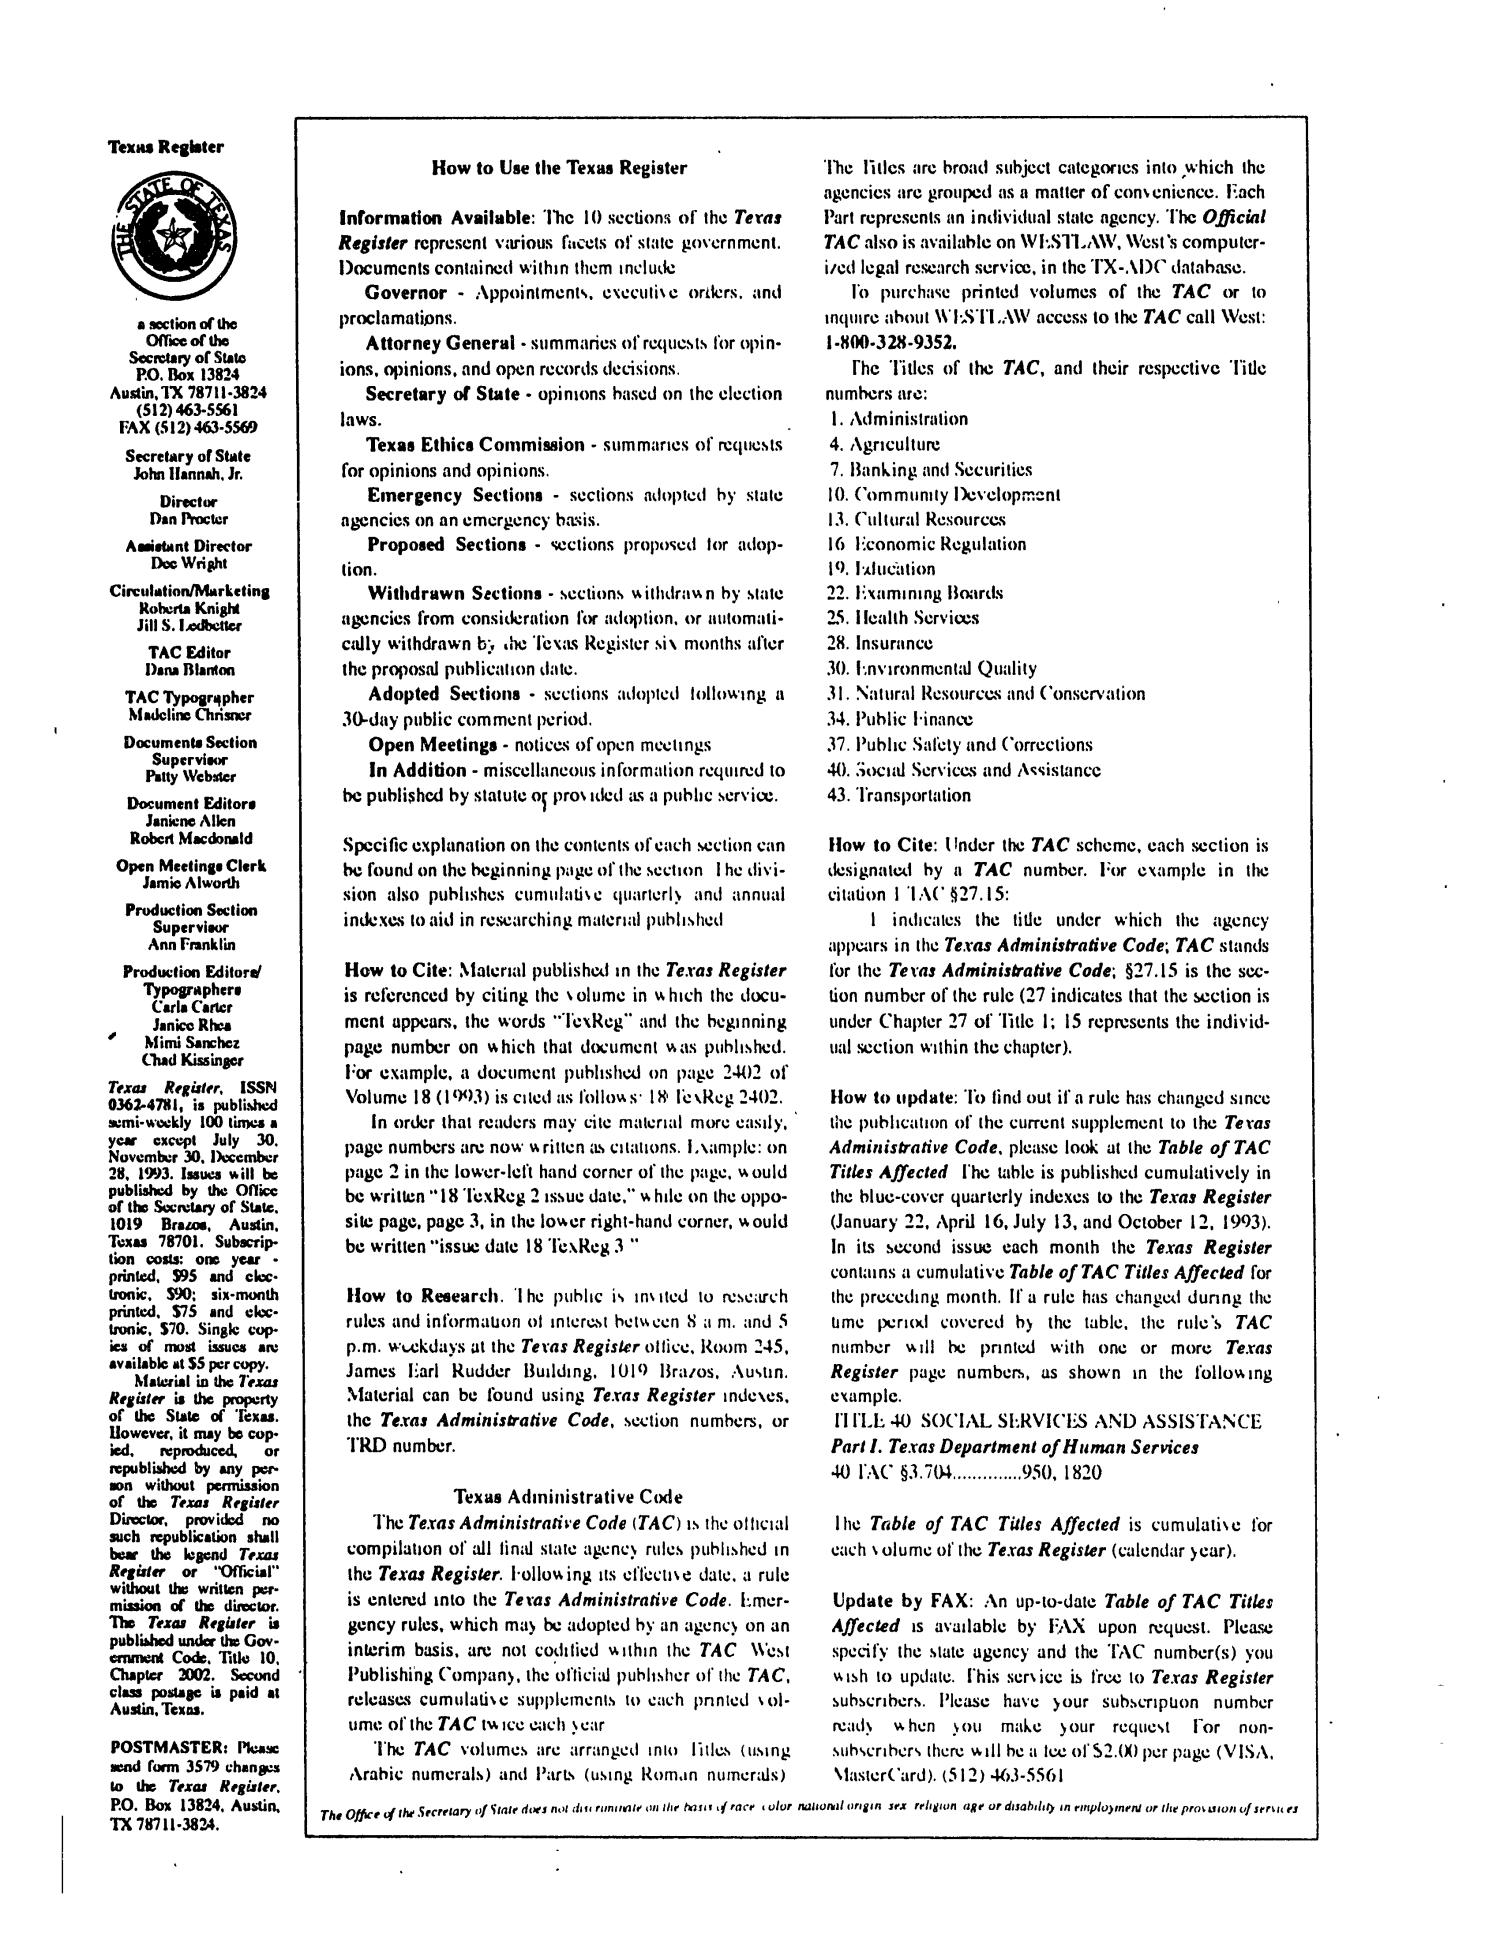 Texas Register, Volume 18, Number 93, Pages 9235-9370, December 14, 1993
                                                
                                                    None
                                                